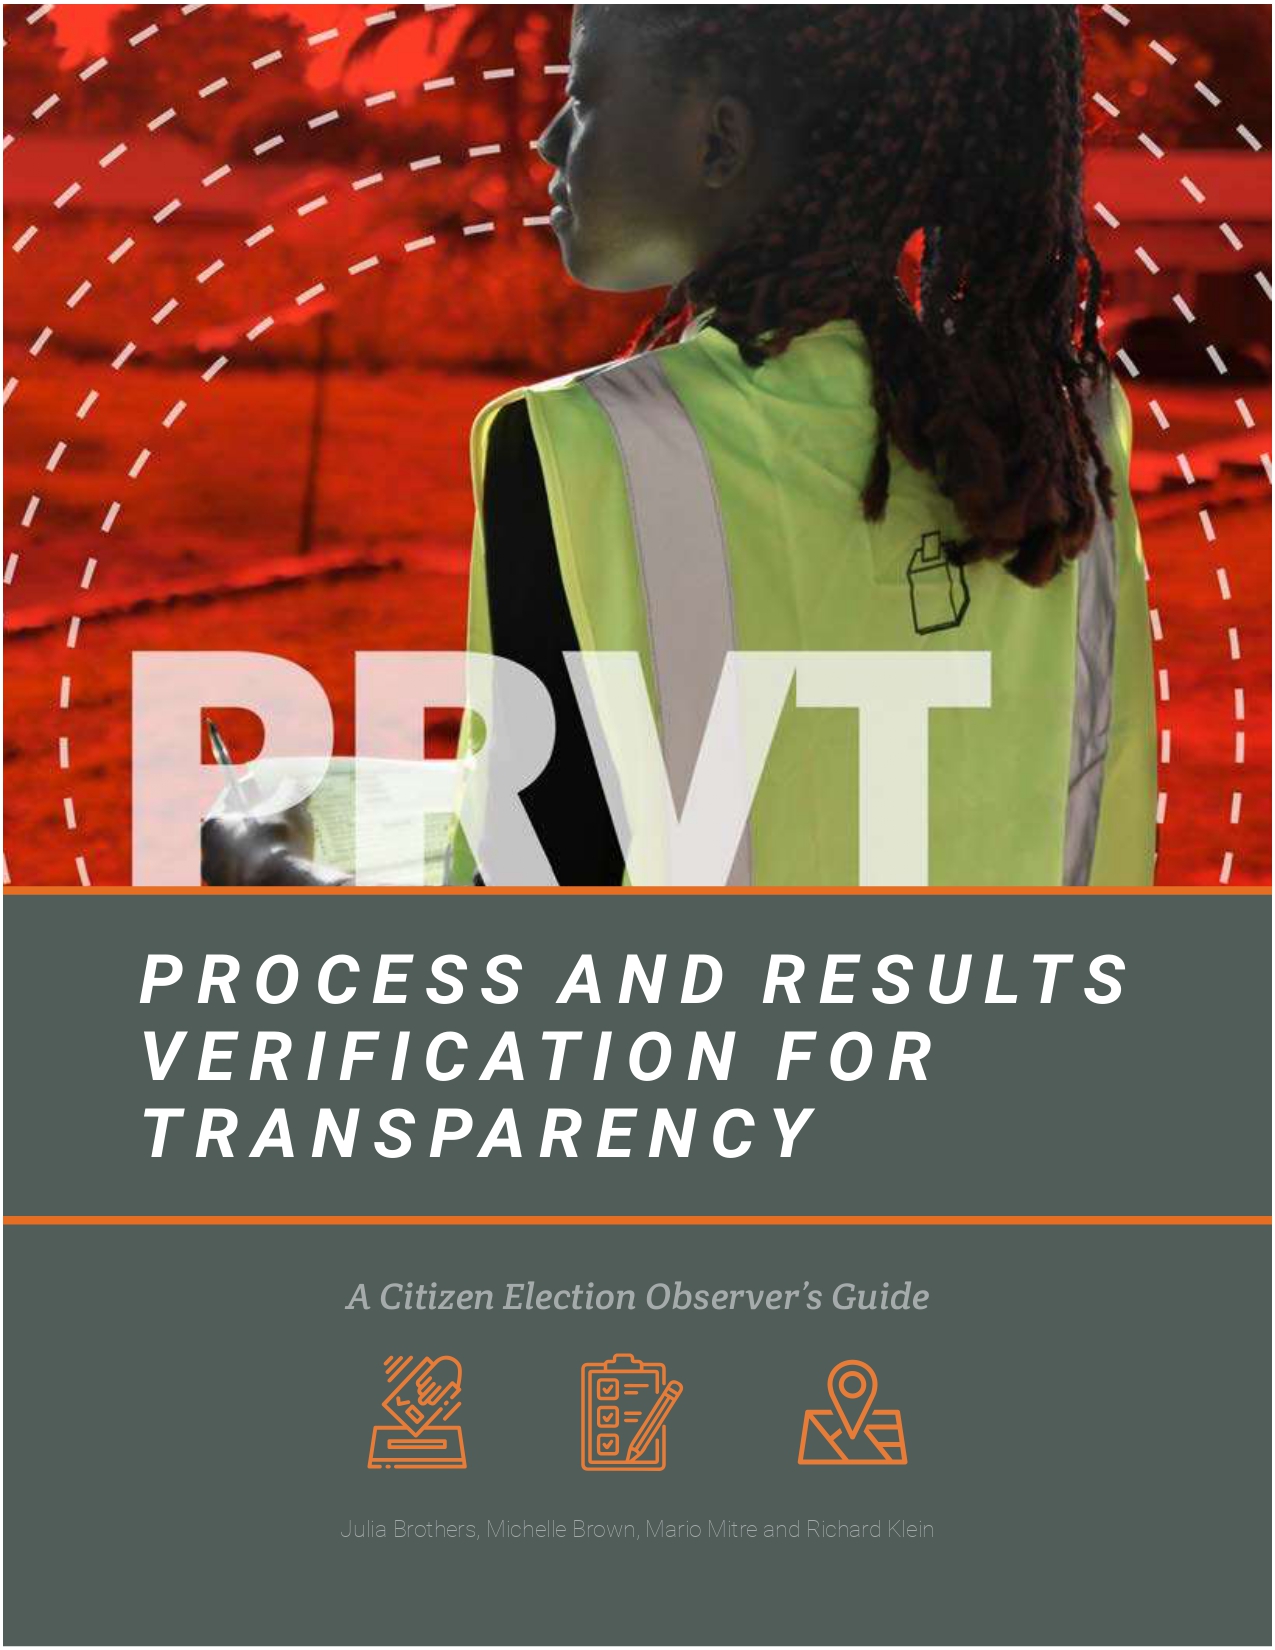 Process and Results Verification for Transparency Guide